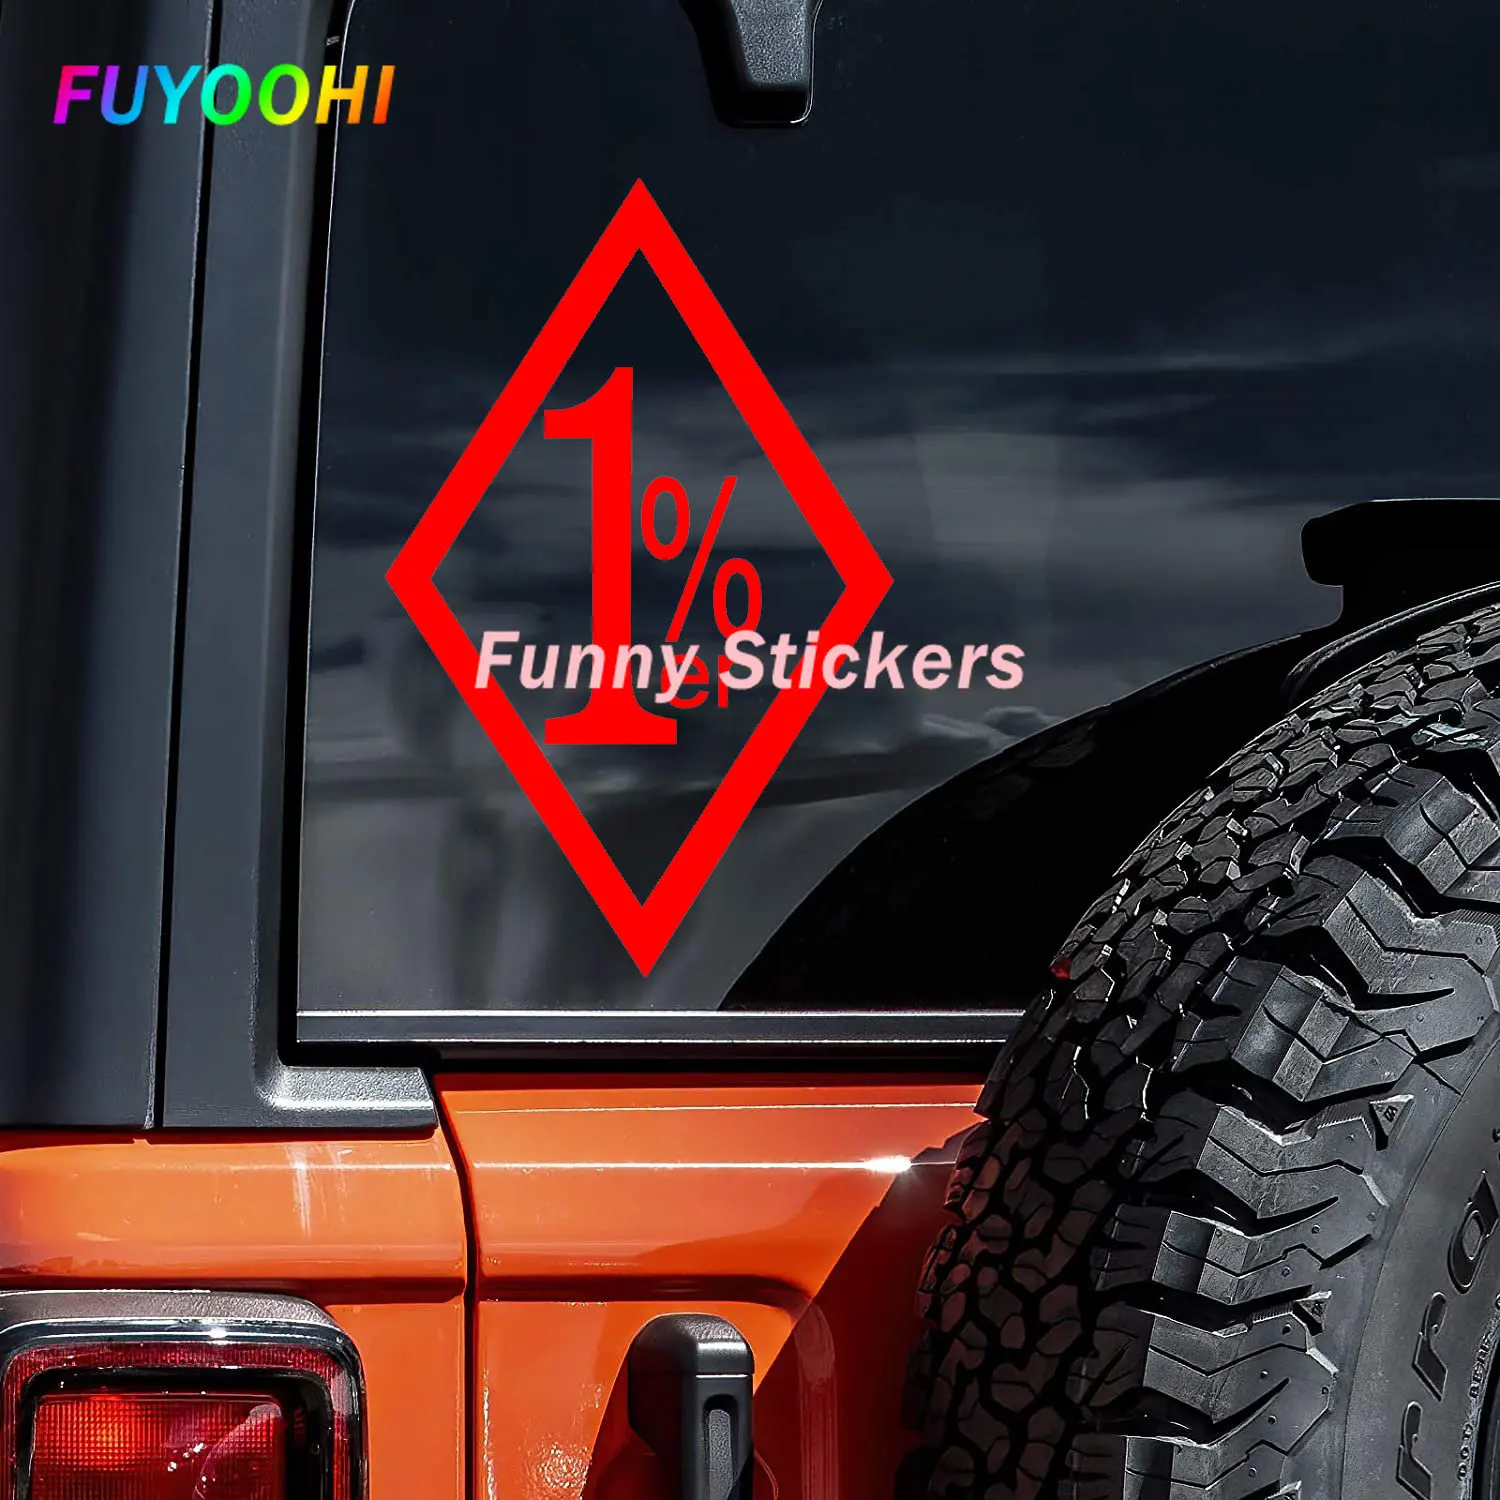 FUYOOHI Funny Stickers 1%ER One Percent Outlaw Biker Vinyl Decal Car-styling Motorcycle Helmet Trunk Window Bumper Accessories